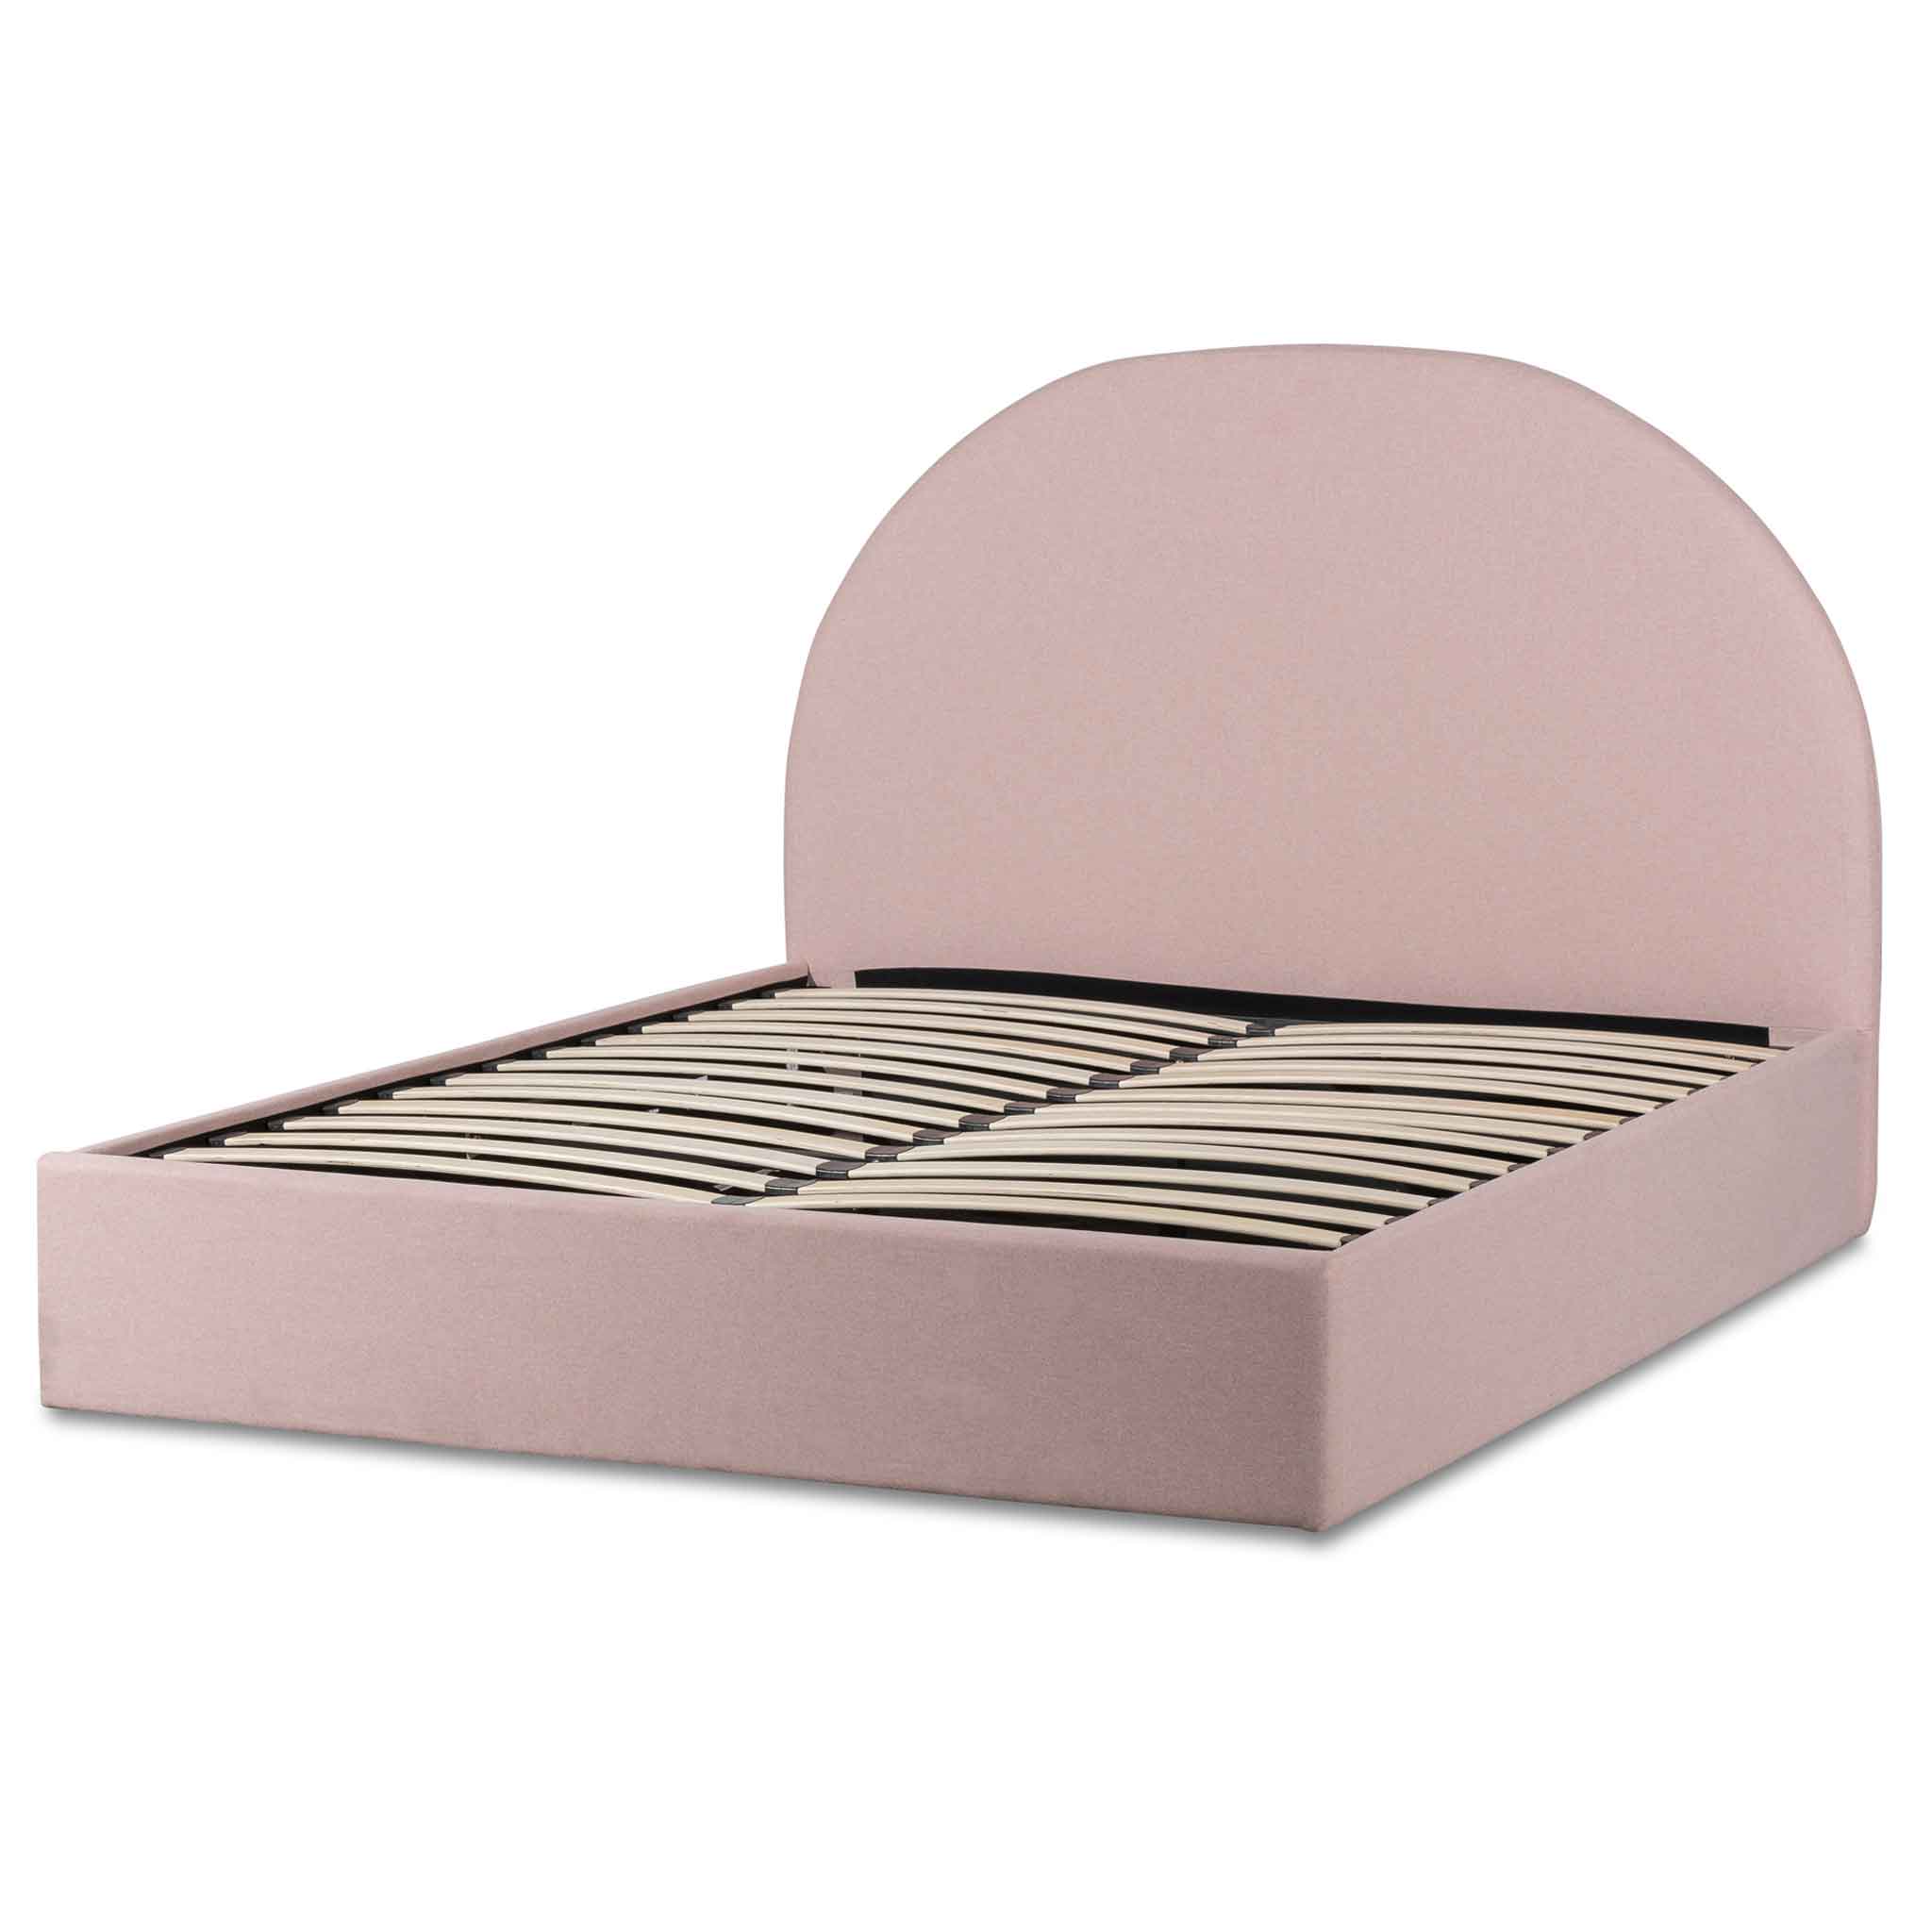 Maximus Queen Bed Frame - Blush Pink - Beds